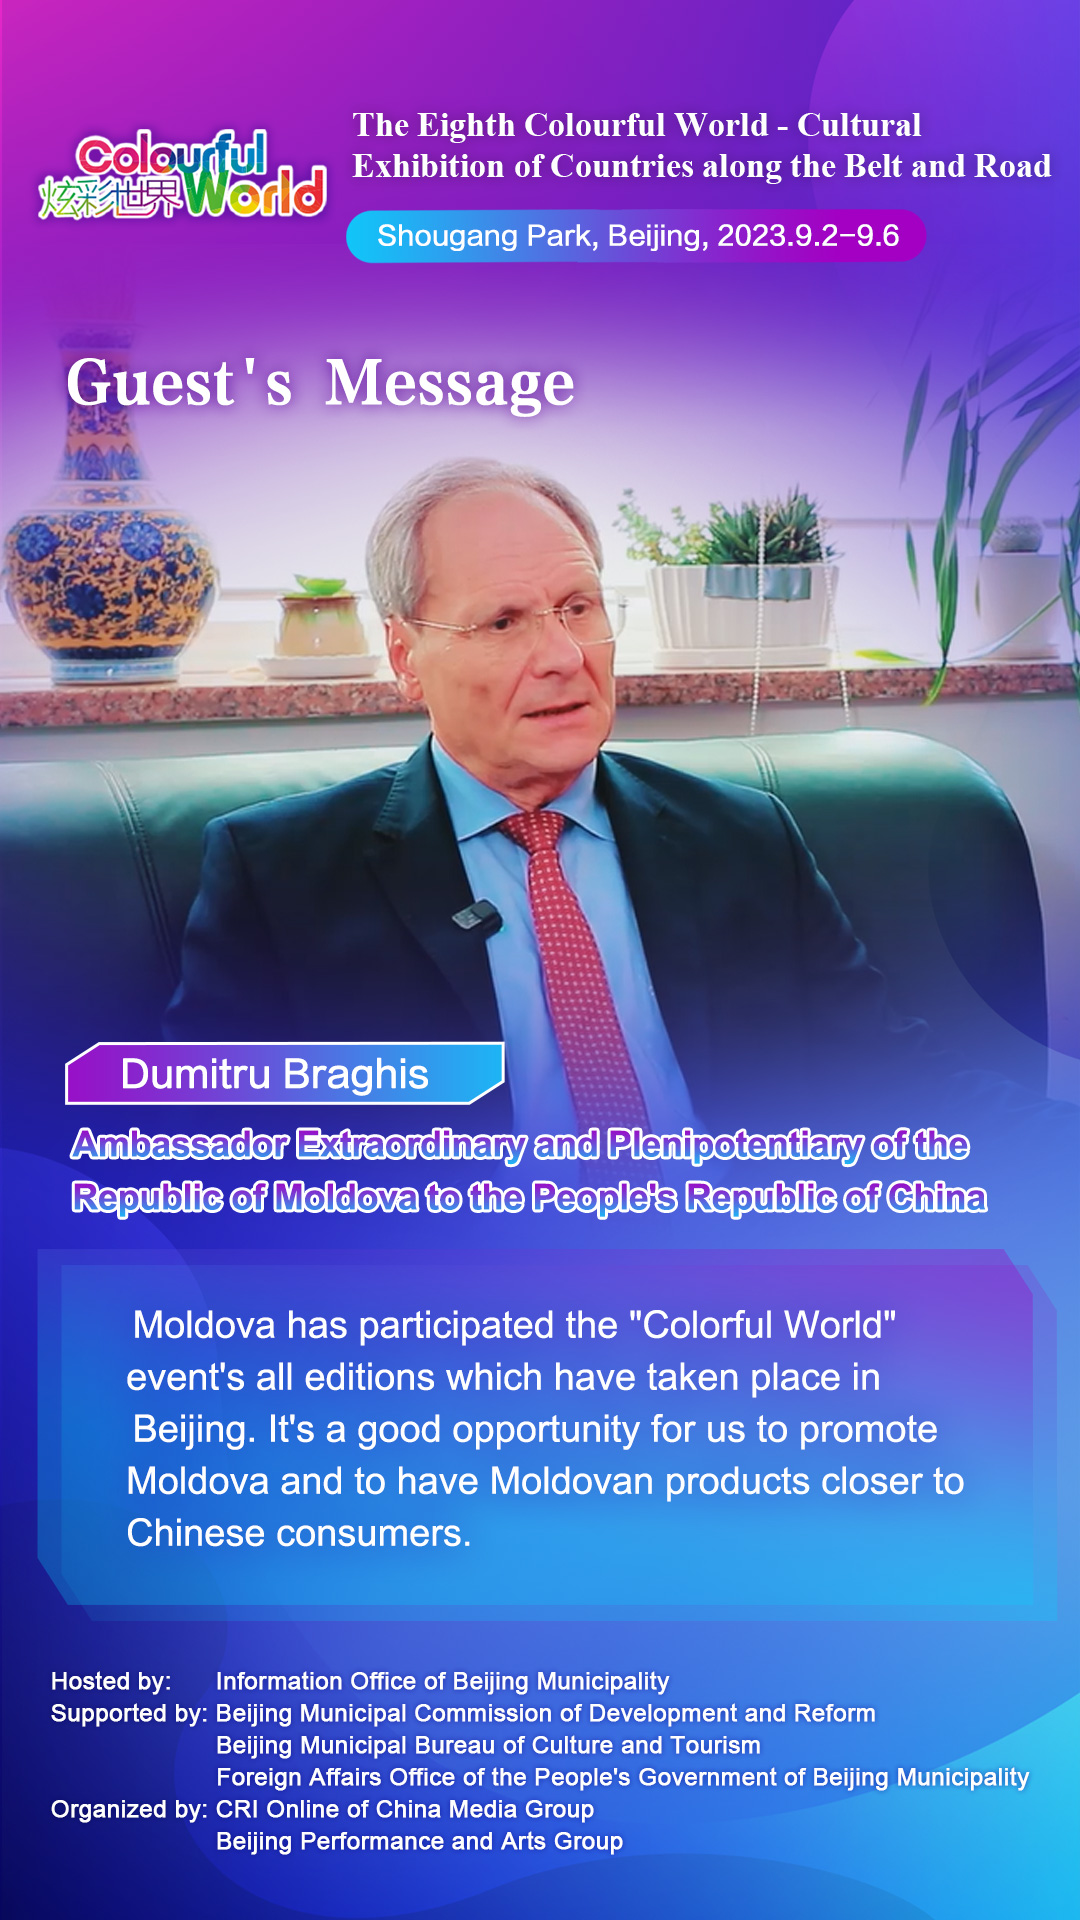 Guest’s Message-Dumitru Braghis, Ambassador Extraordinary and Plenipotentiary of the Republic of Moldova to the People's Republic of China_fororder_第八届“炫彩世界”-金句海报-English-摩尔多瓦(1)